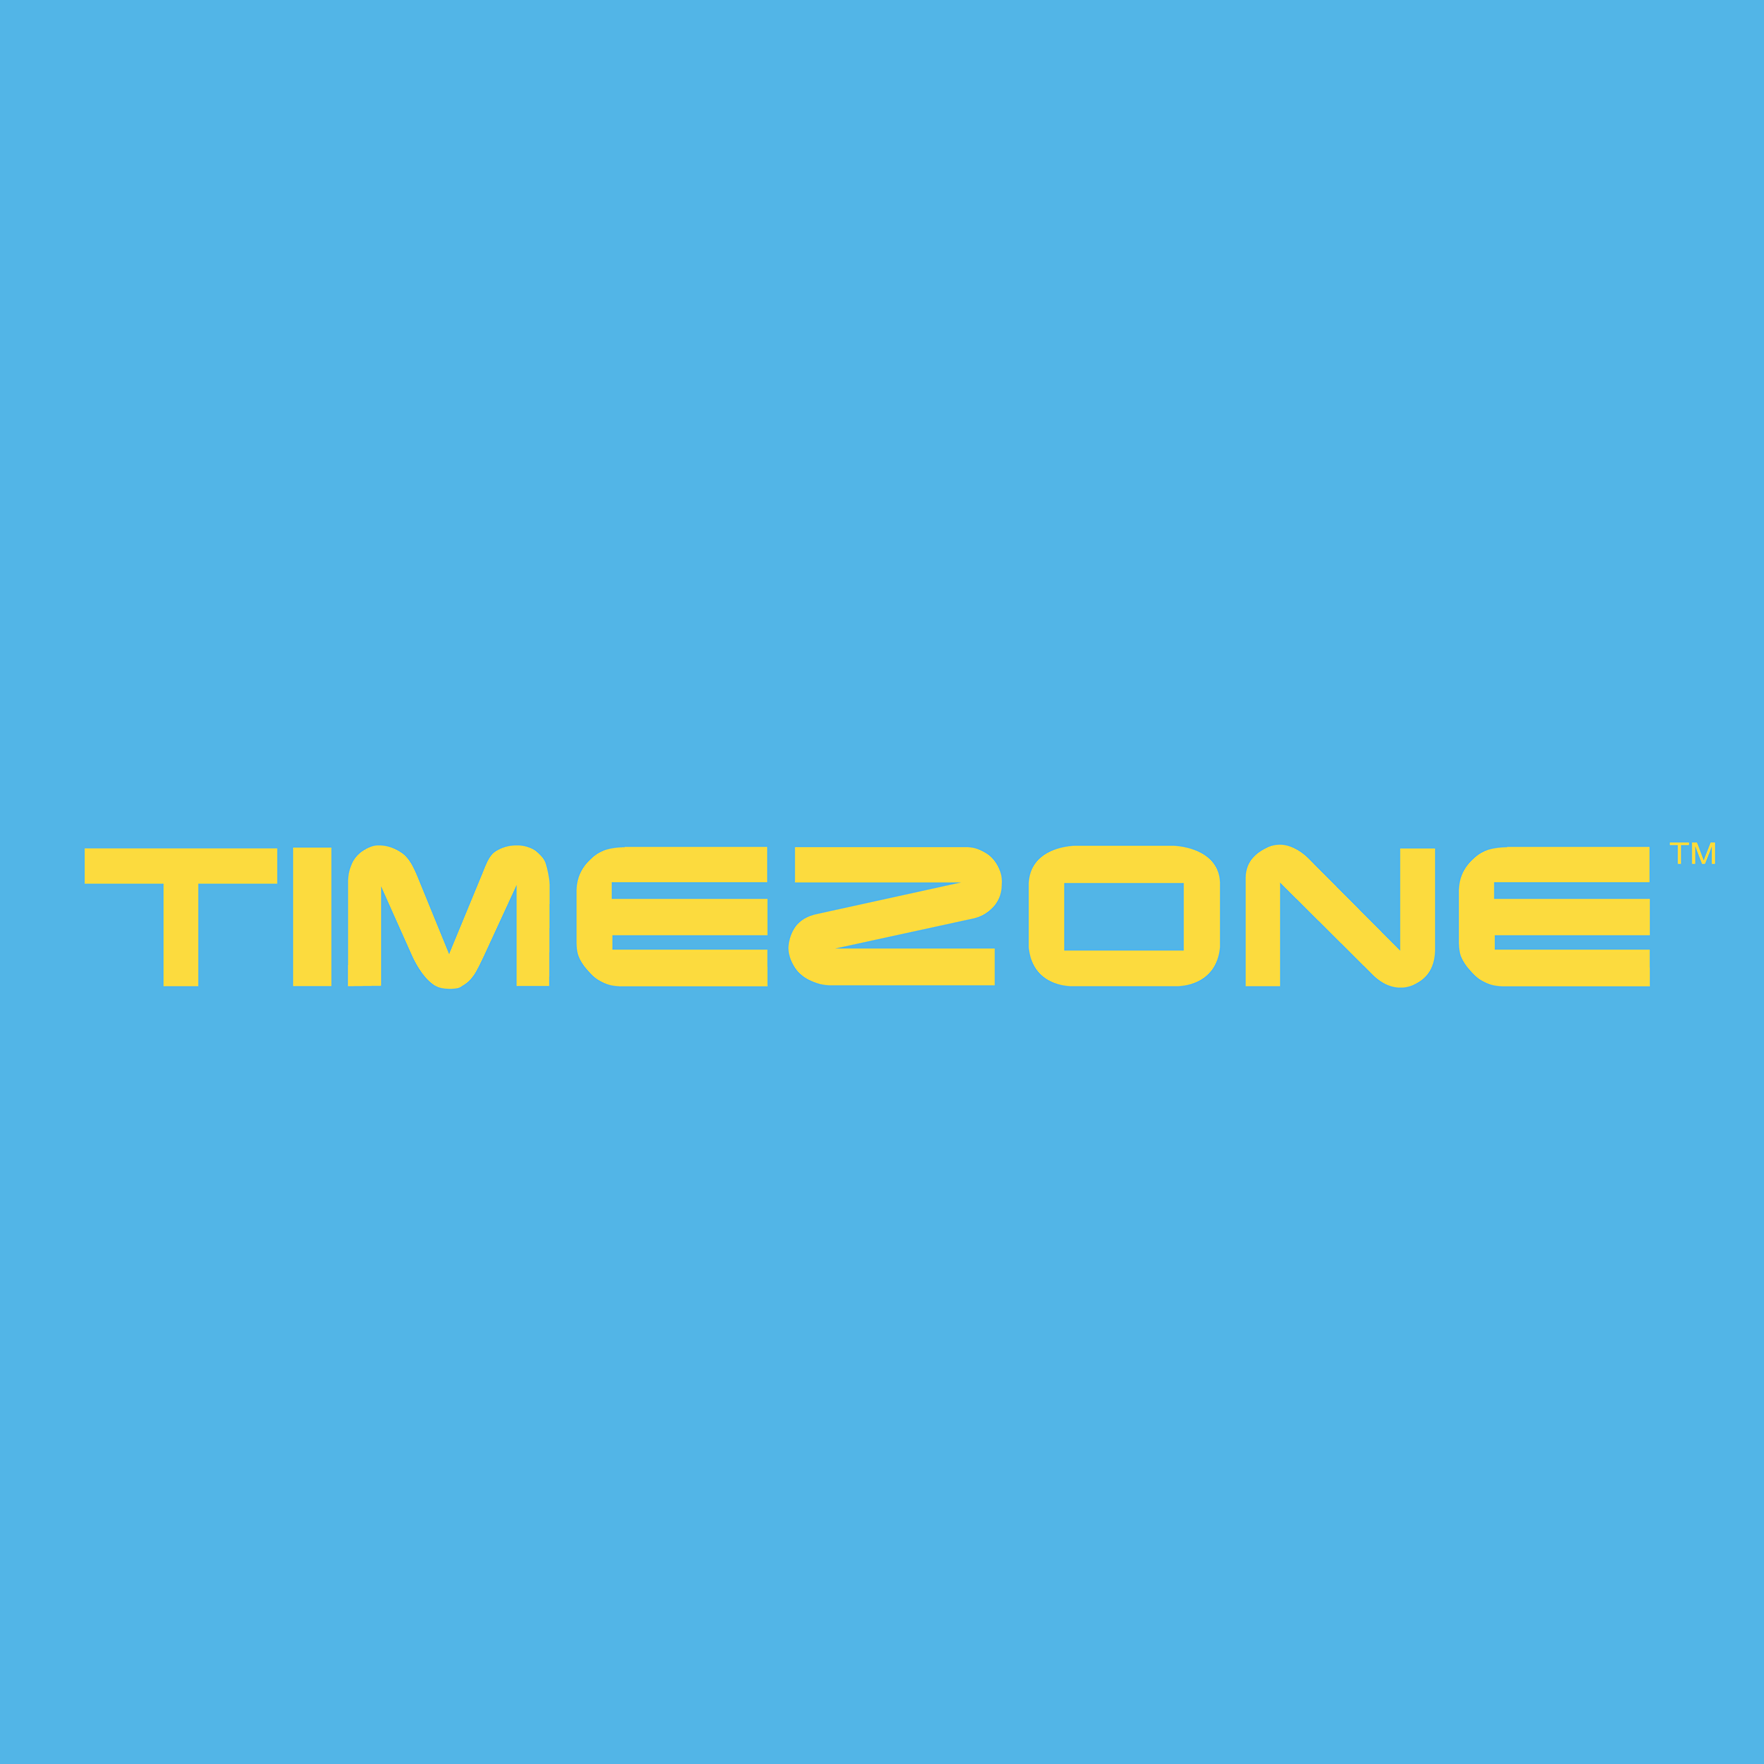 Timezone (Jurong Point) - Dine, Shop, Earn